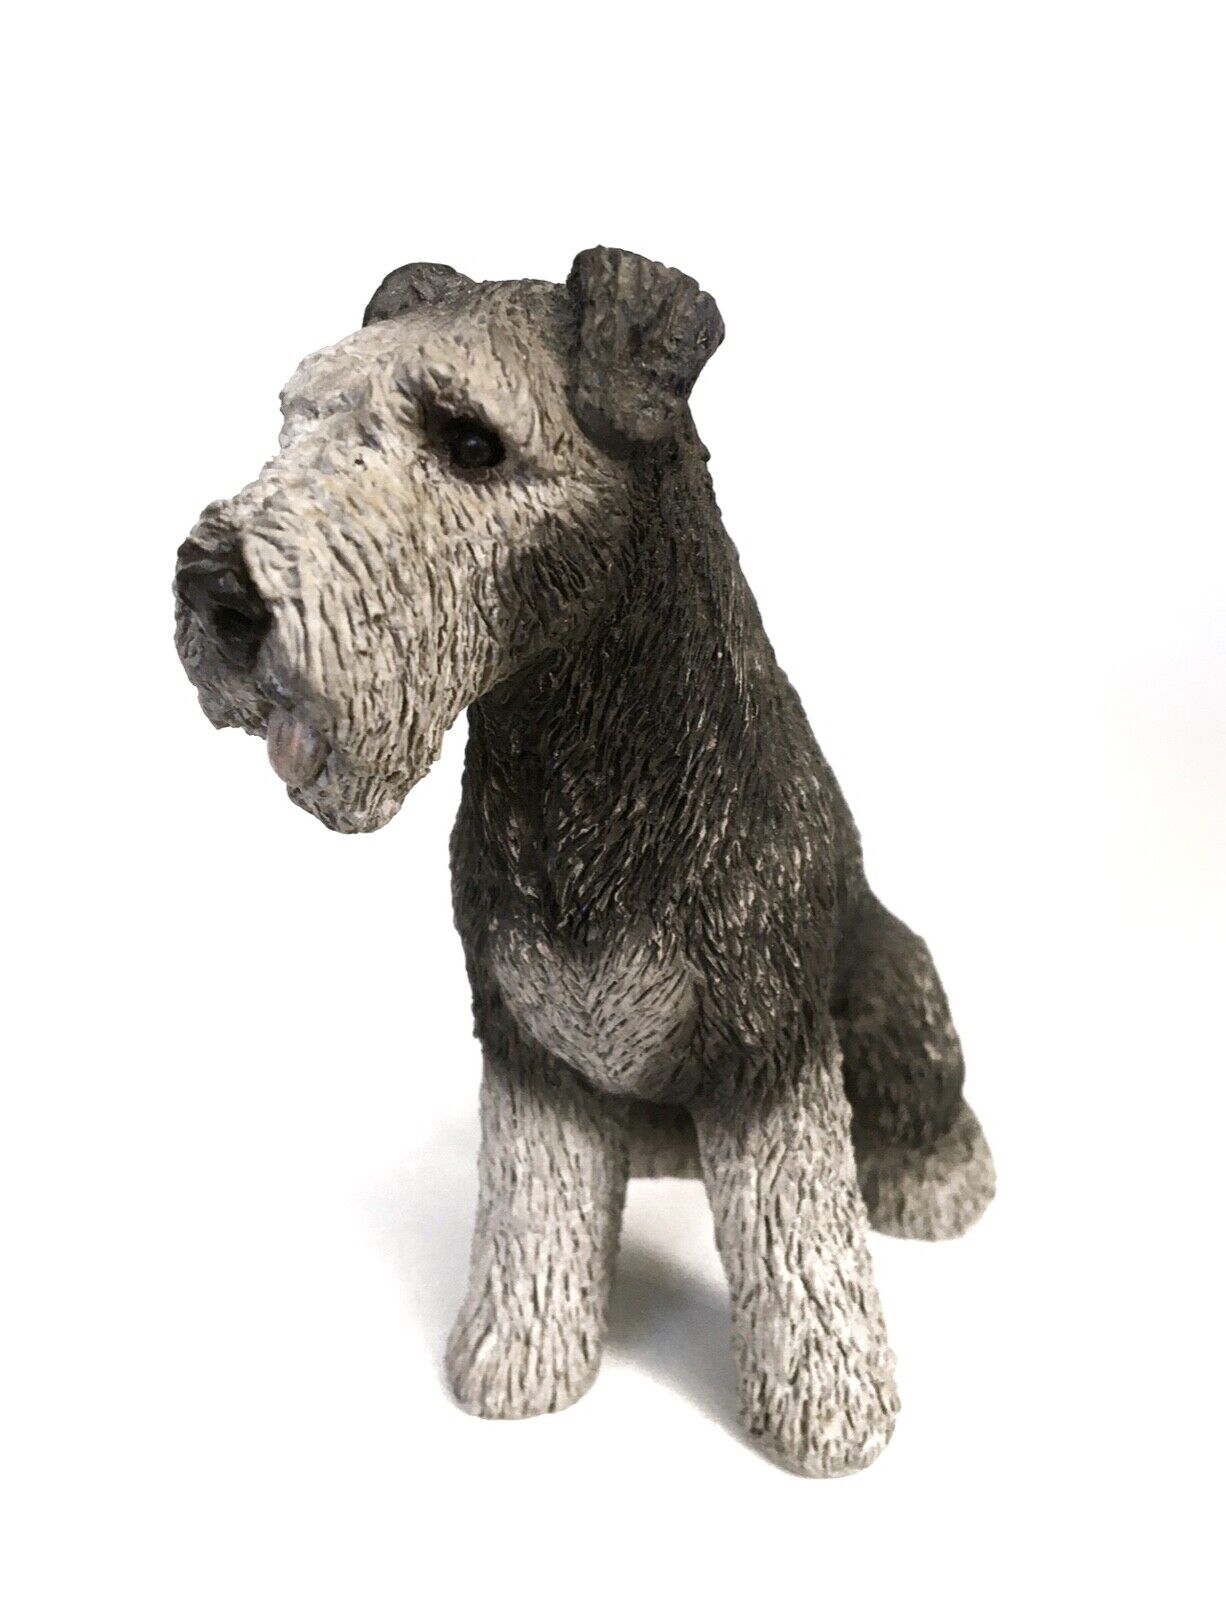 Vintage Sandicast Grey Airedale Terrier Signed by Sandra Brue 4.5” Tall